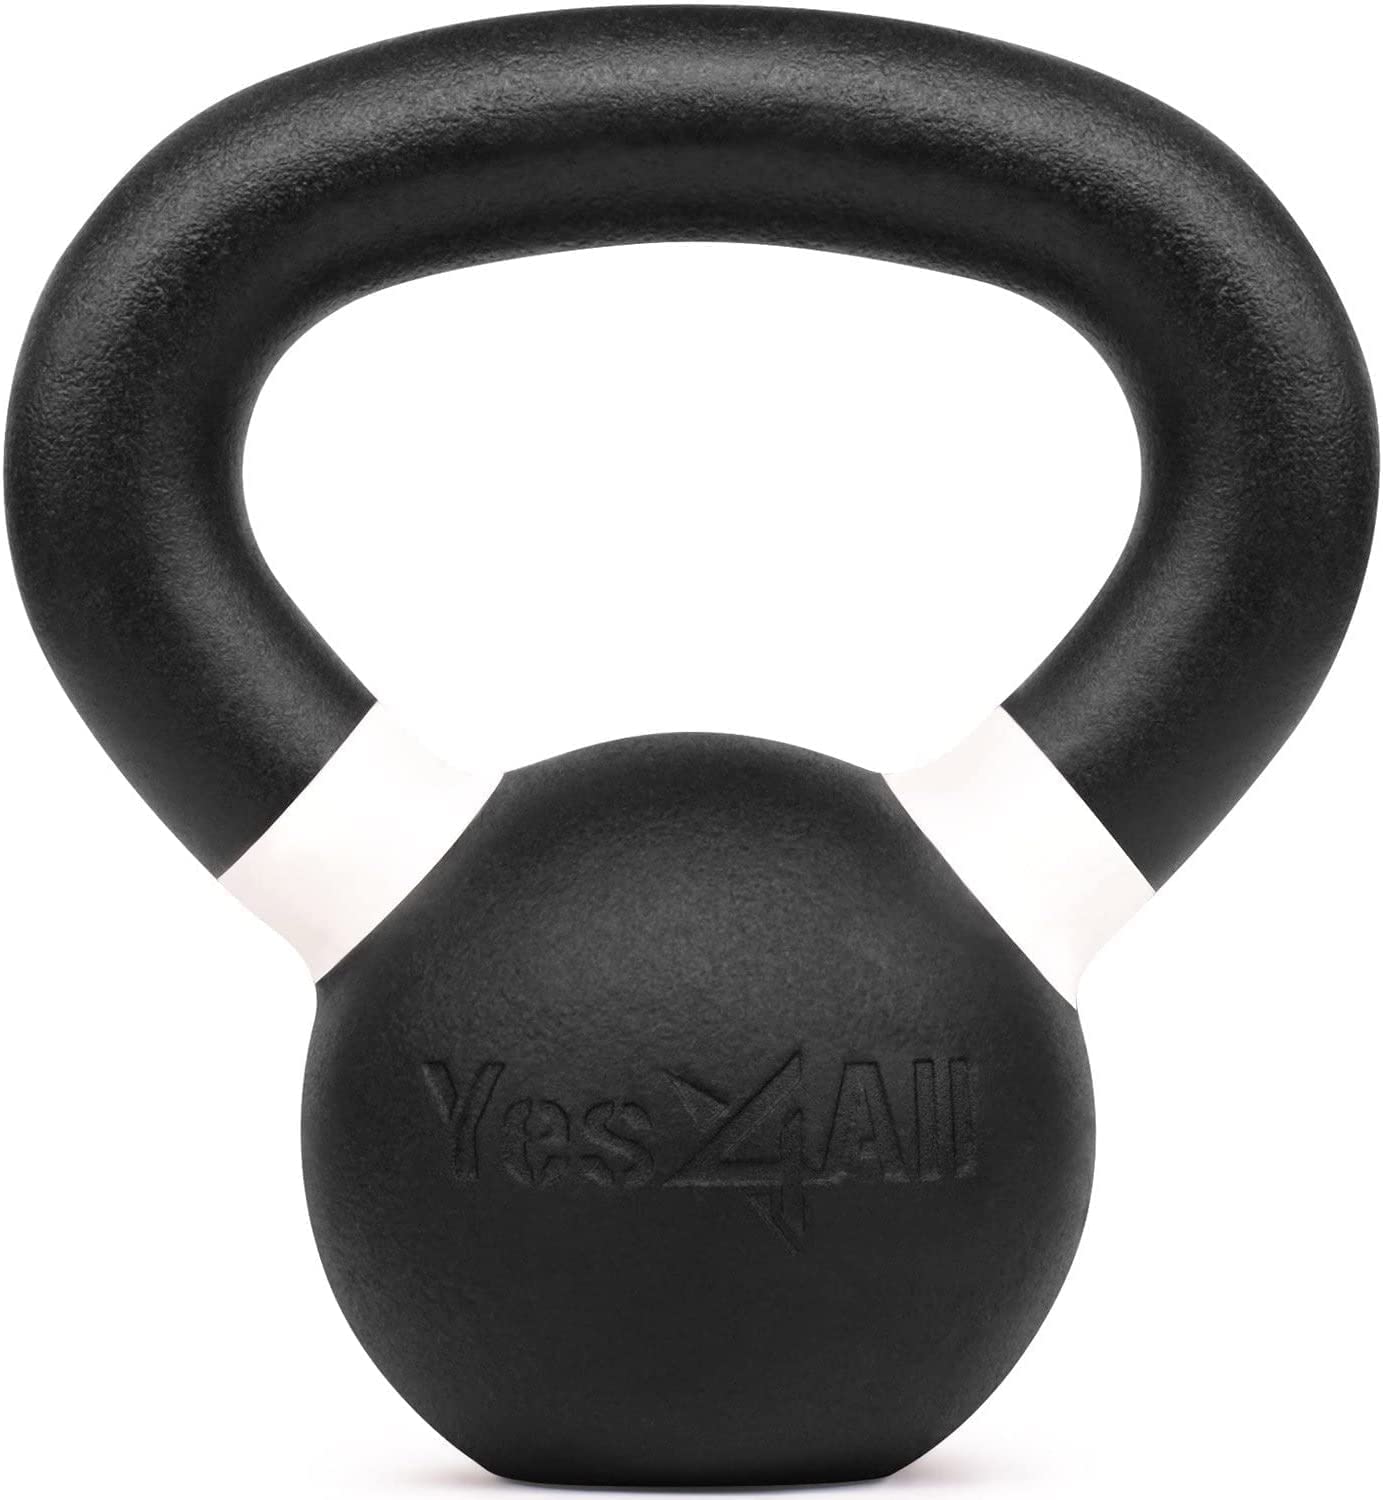 Yes4All 4kg / 9lb Powder Coated Kettlebell, Single - image 4 of 9